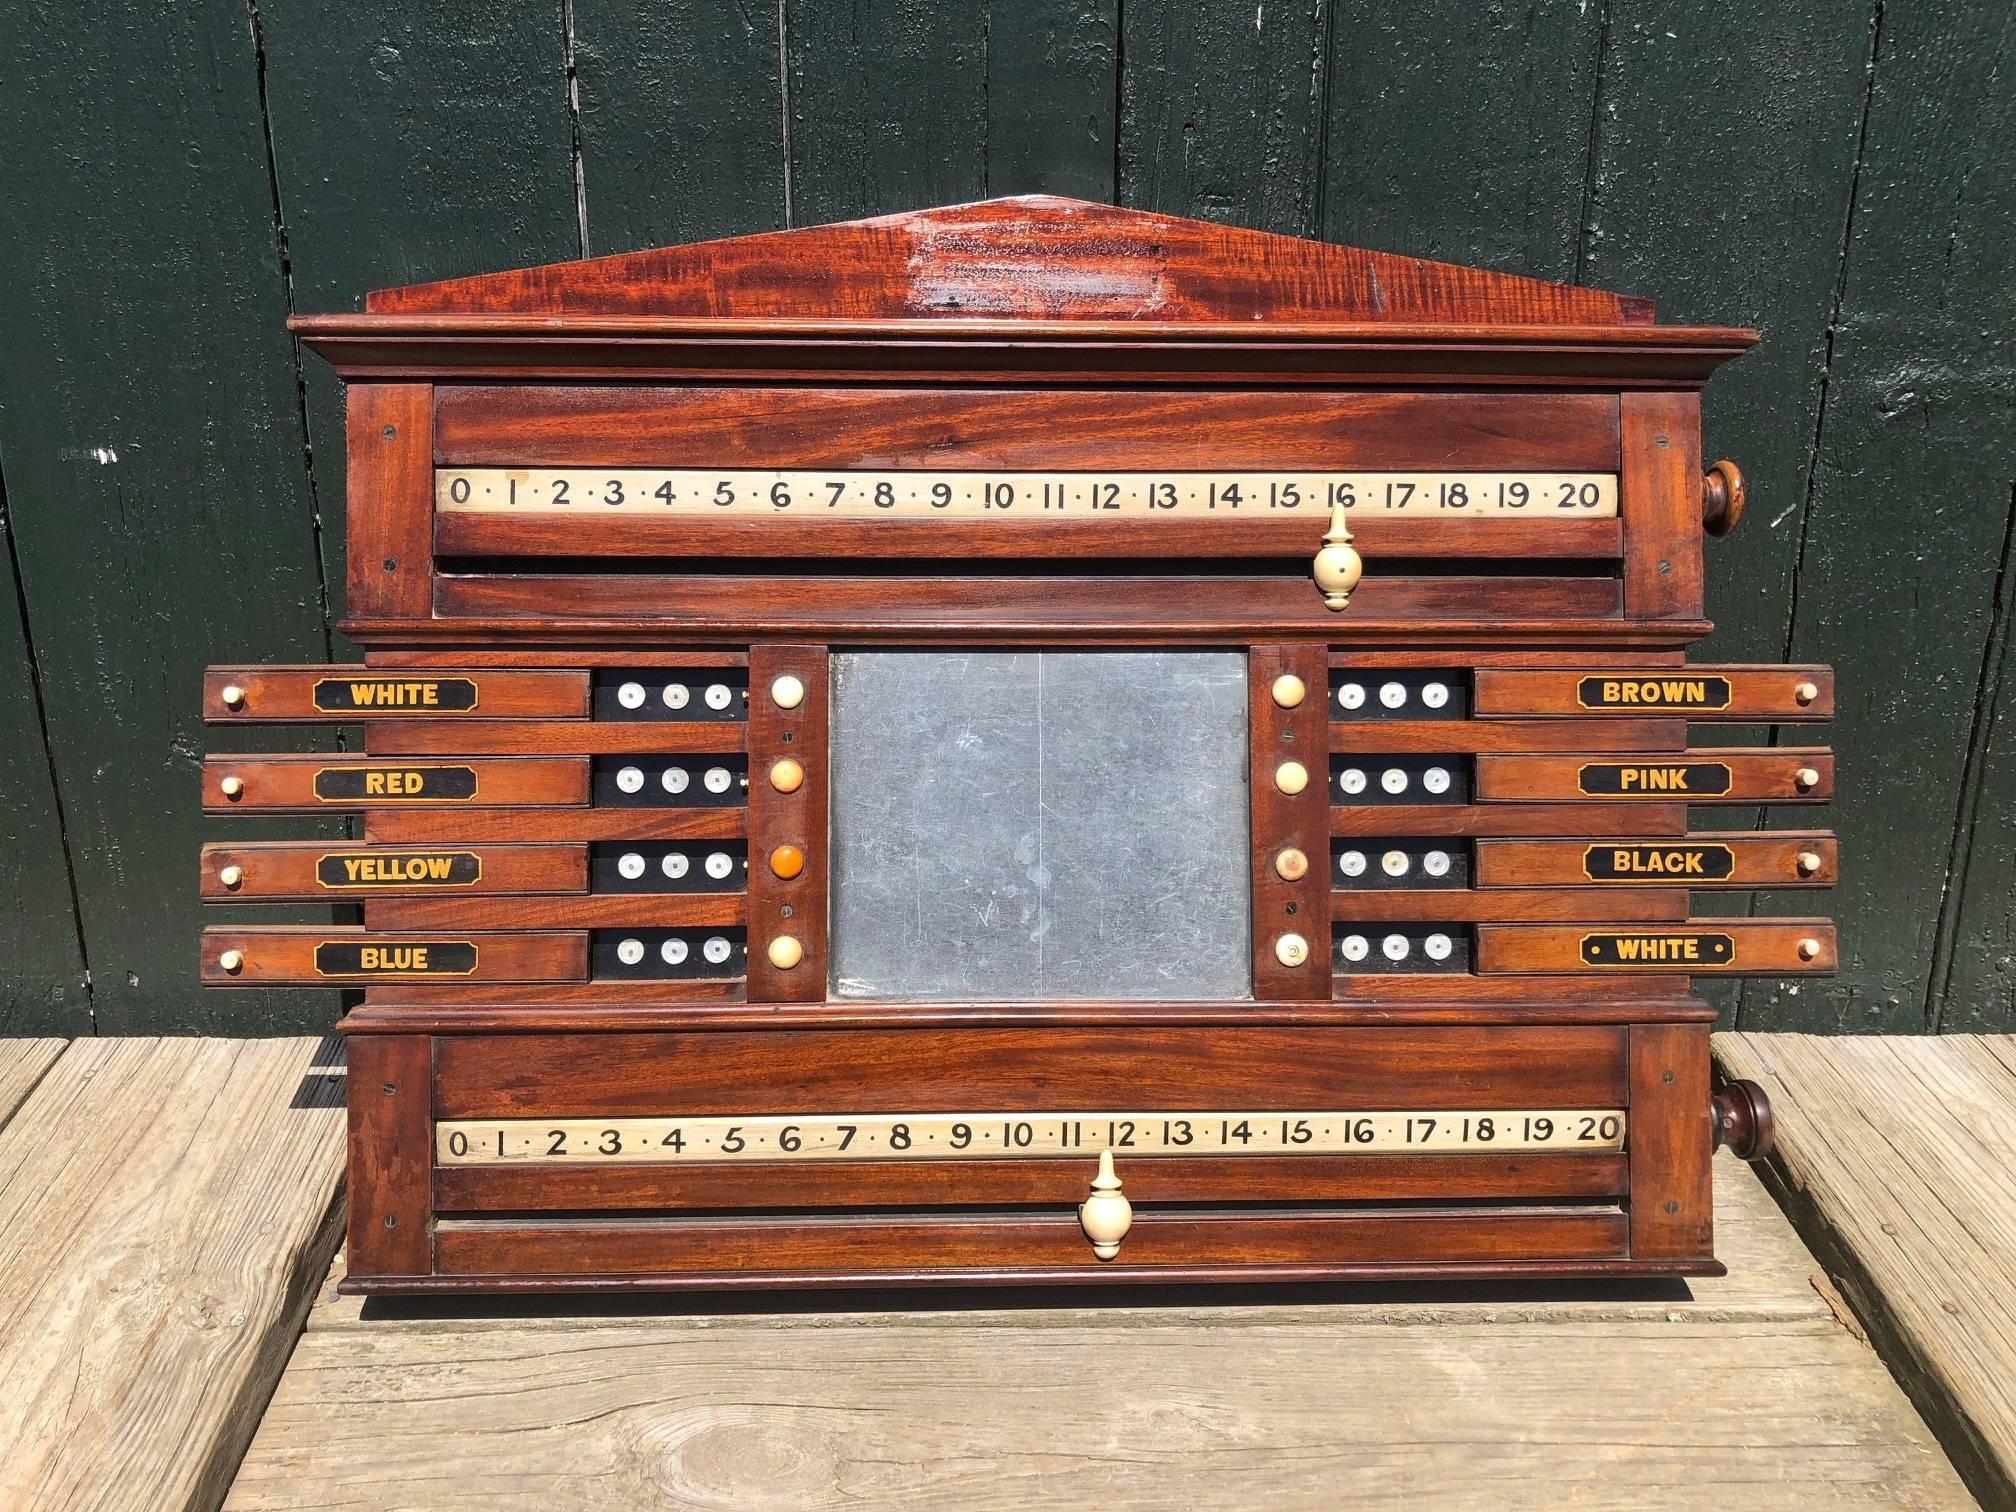 This British snooker or billiard scoreboard is made of mahogany and has bone and mother-of-pearl markers. Perfect wall accent for a game room or office. Bought in the North of England, about 100 years old. There are hooks on each side for easy